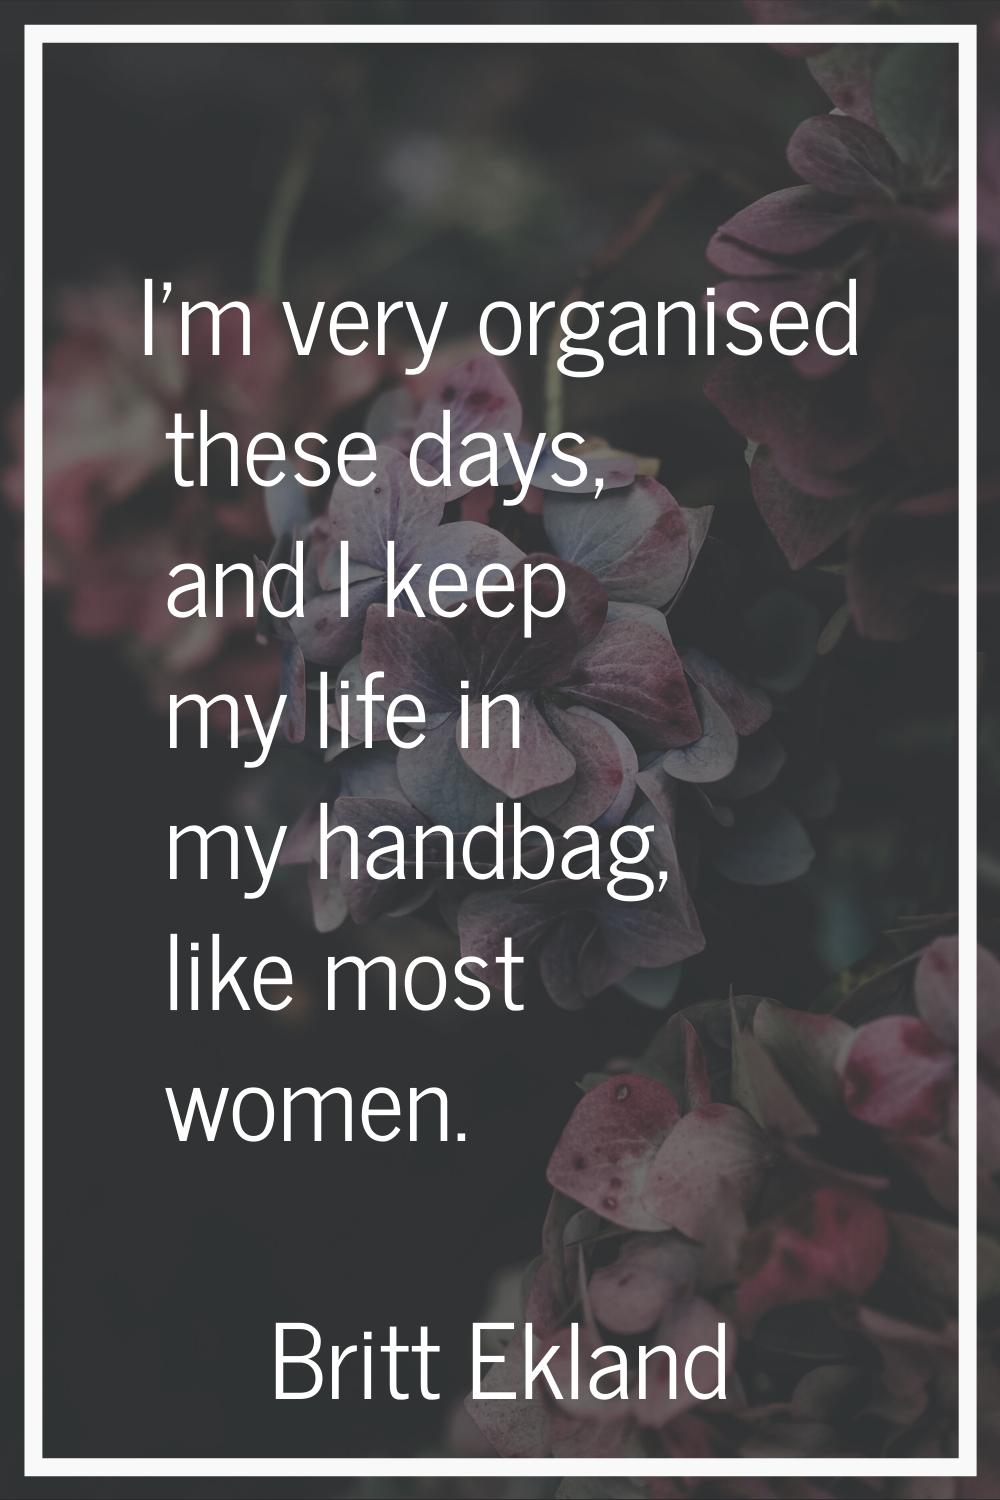 I'm very organised these days, and I keep my life in my handbag, like most women.